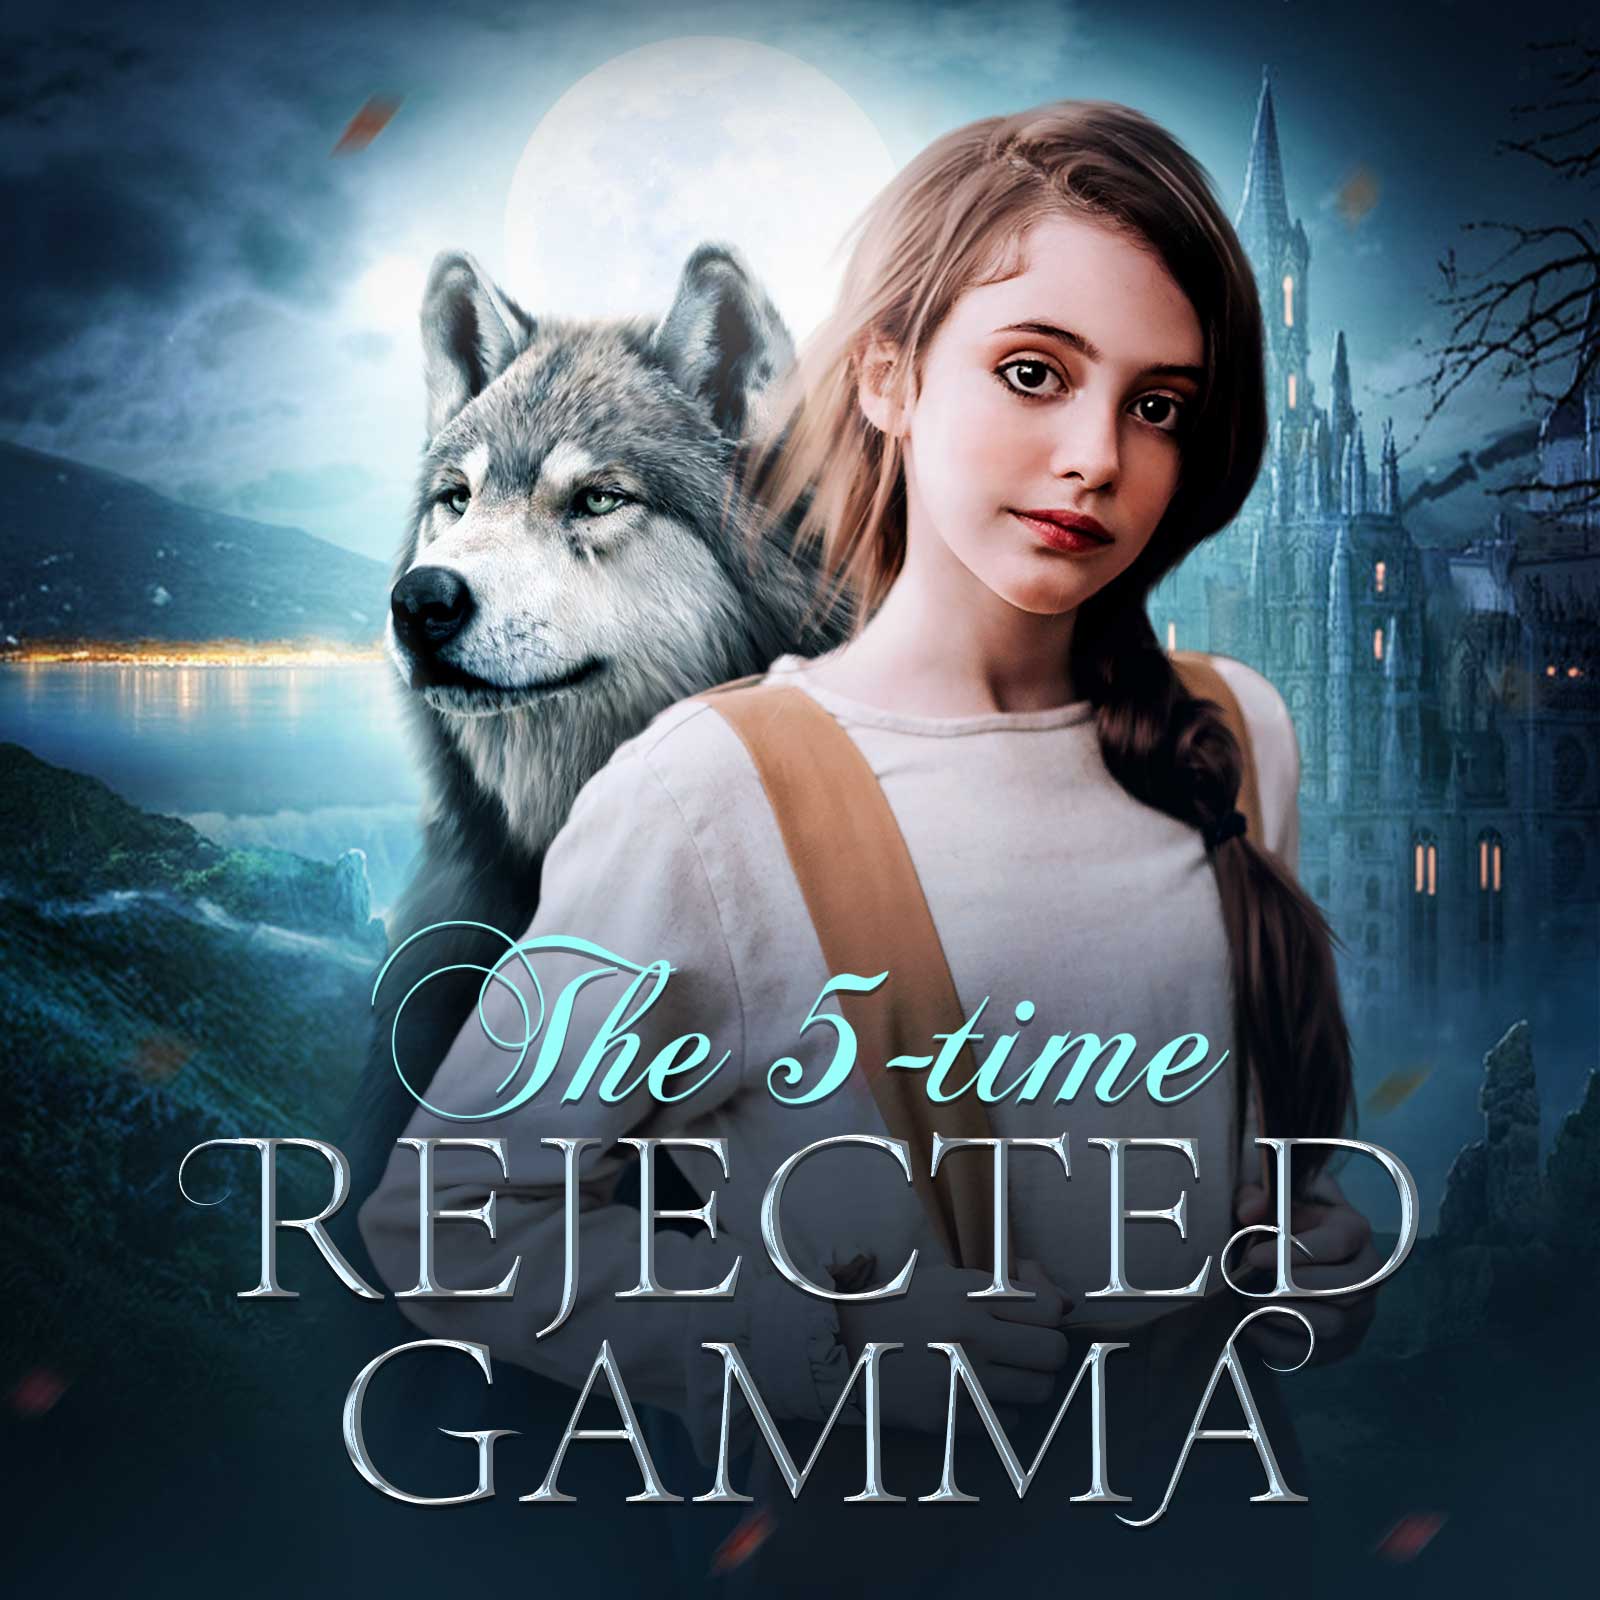 5 time rejected gamma